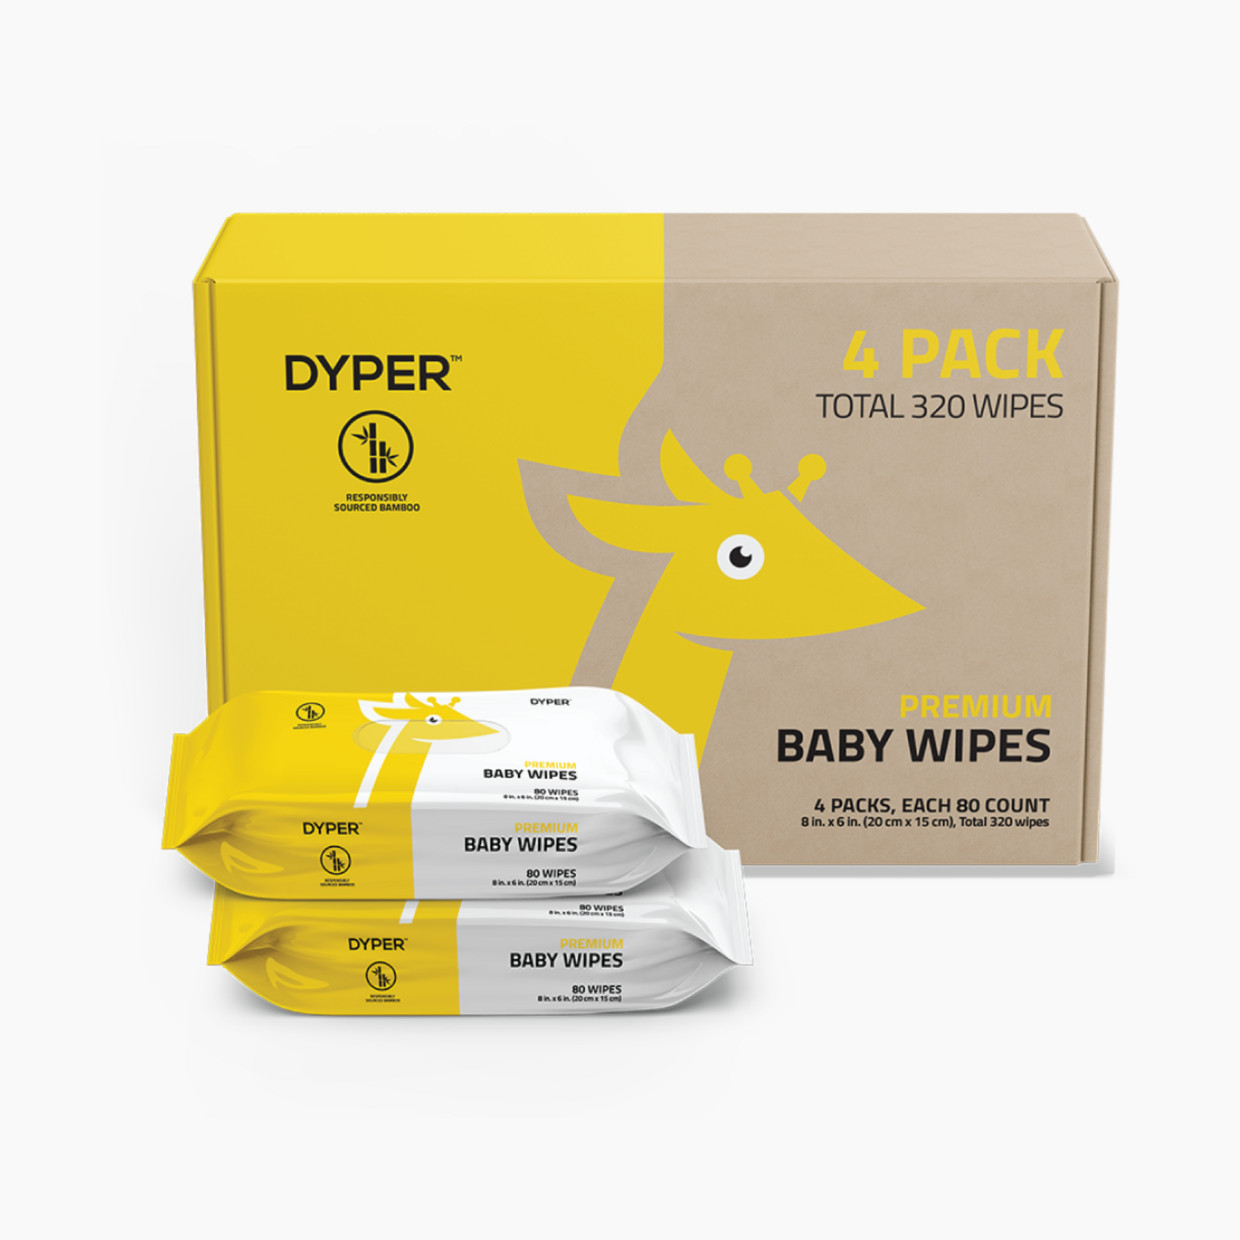 DYPER Bamboo Viscose Baby Wipes - 240.